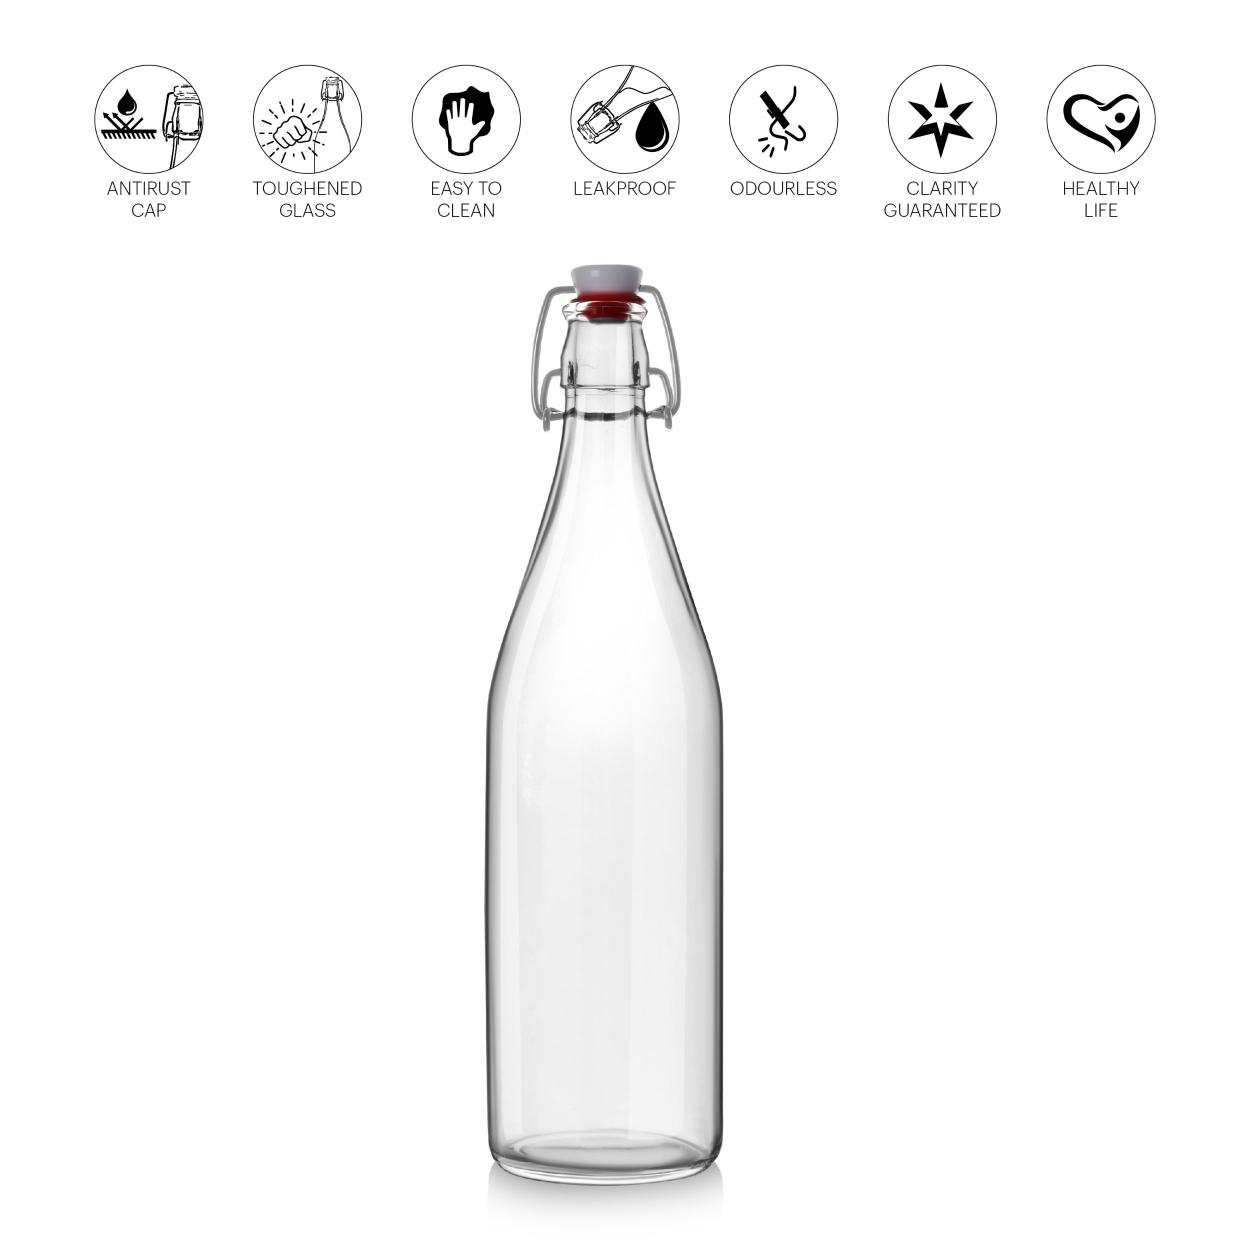 Aquaria Glass Water Bottle, 1000ml Clear / 1000ml / 3 Pieces